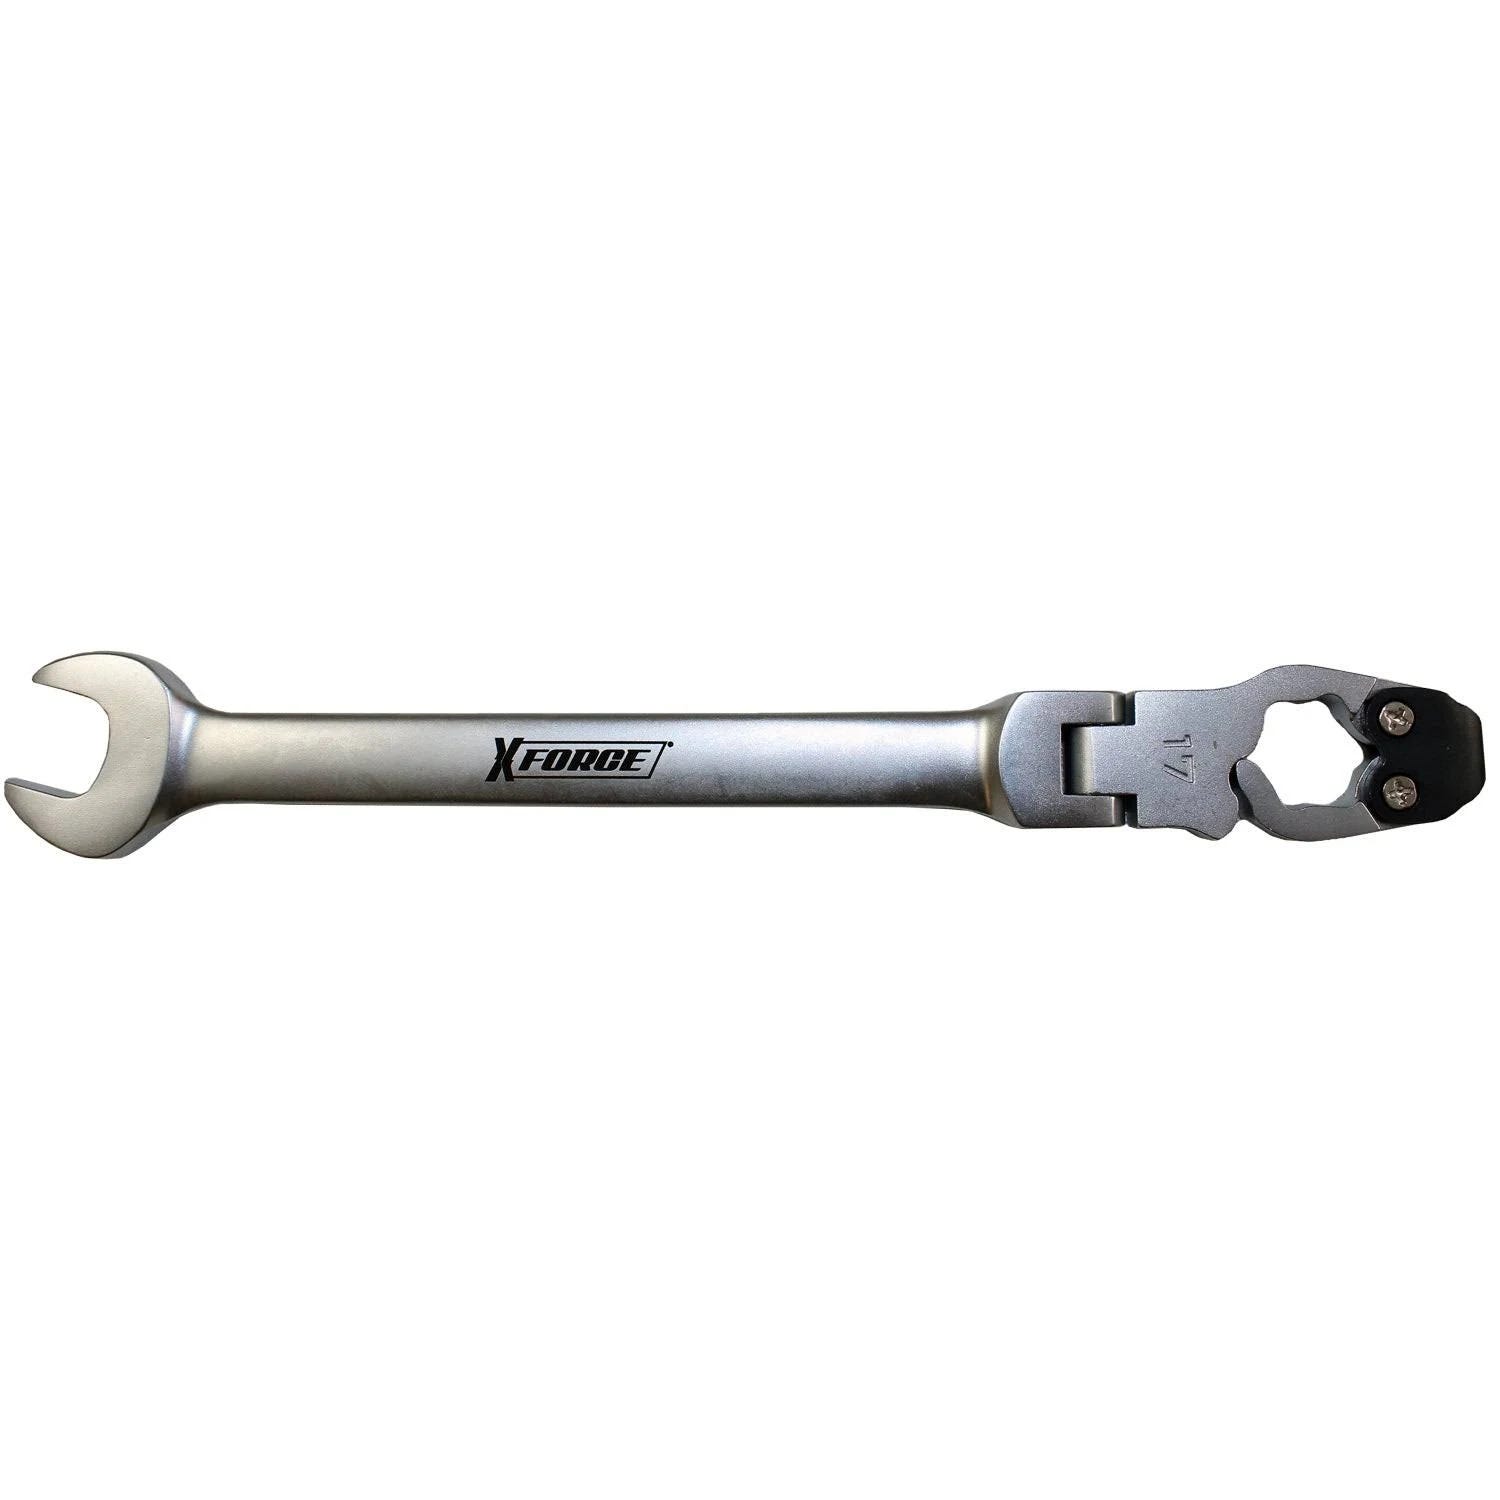 Easy-Grip 17mm Line Wrench for Efficient Fitting Adjustments | Image